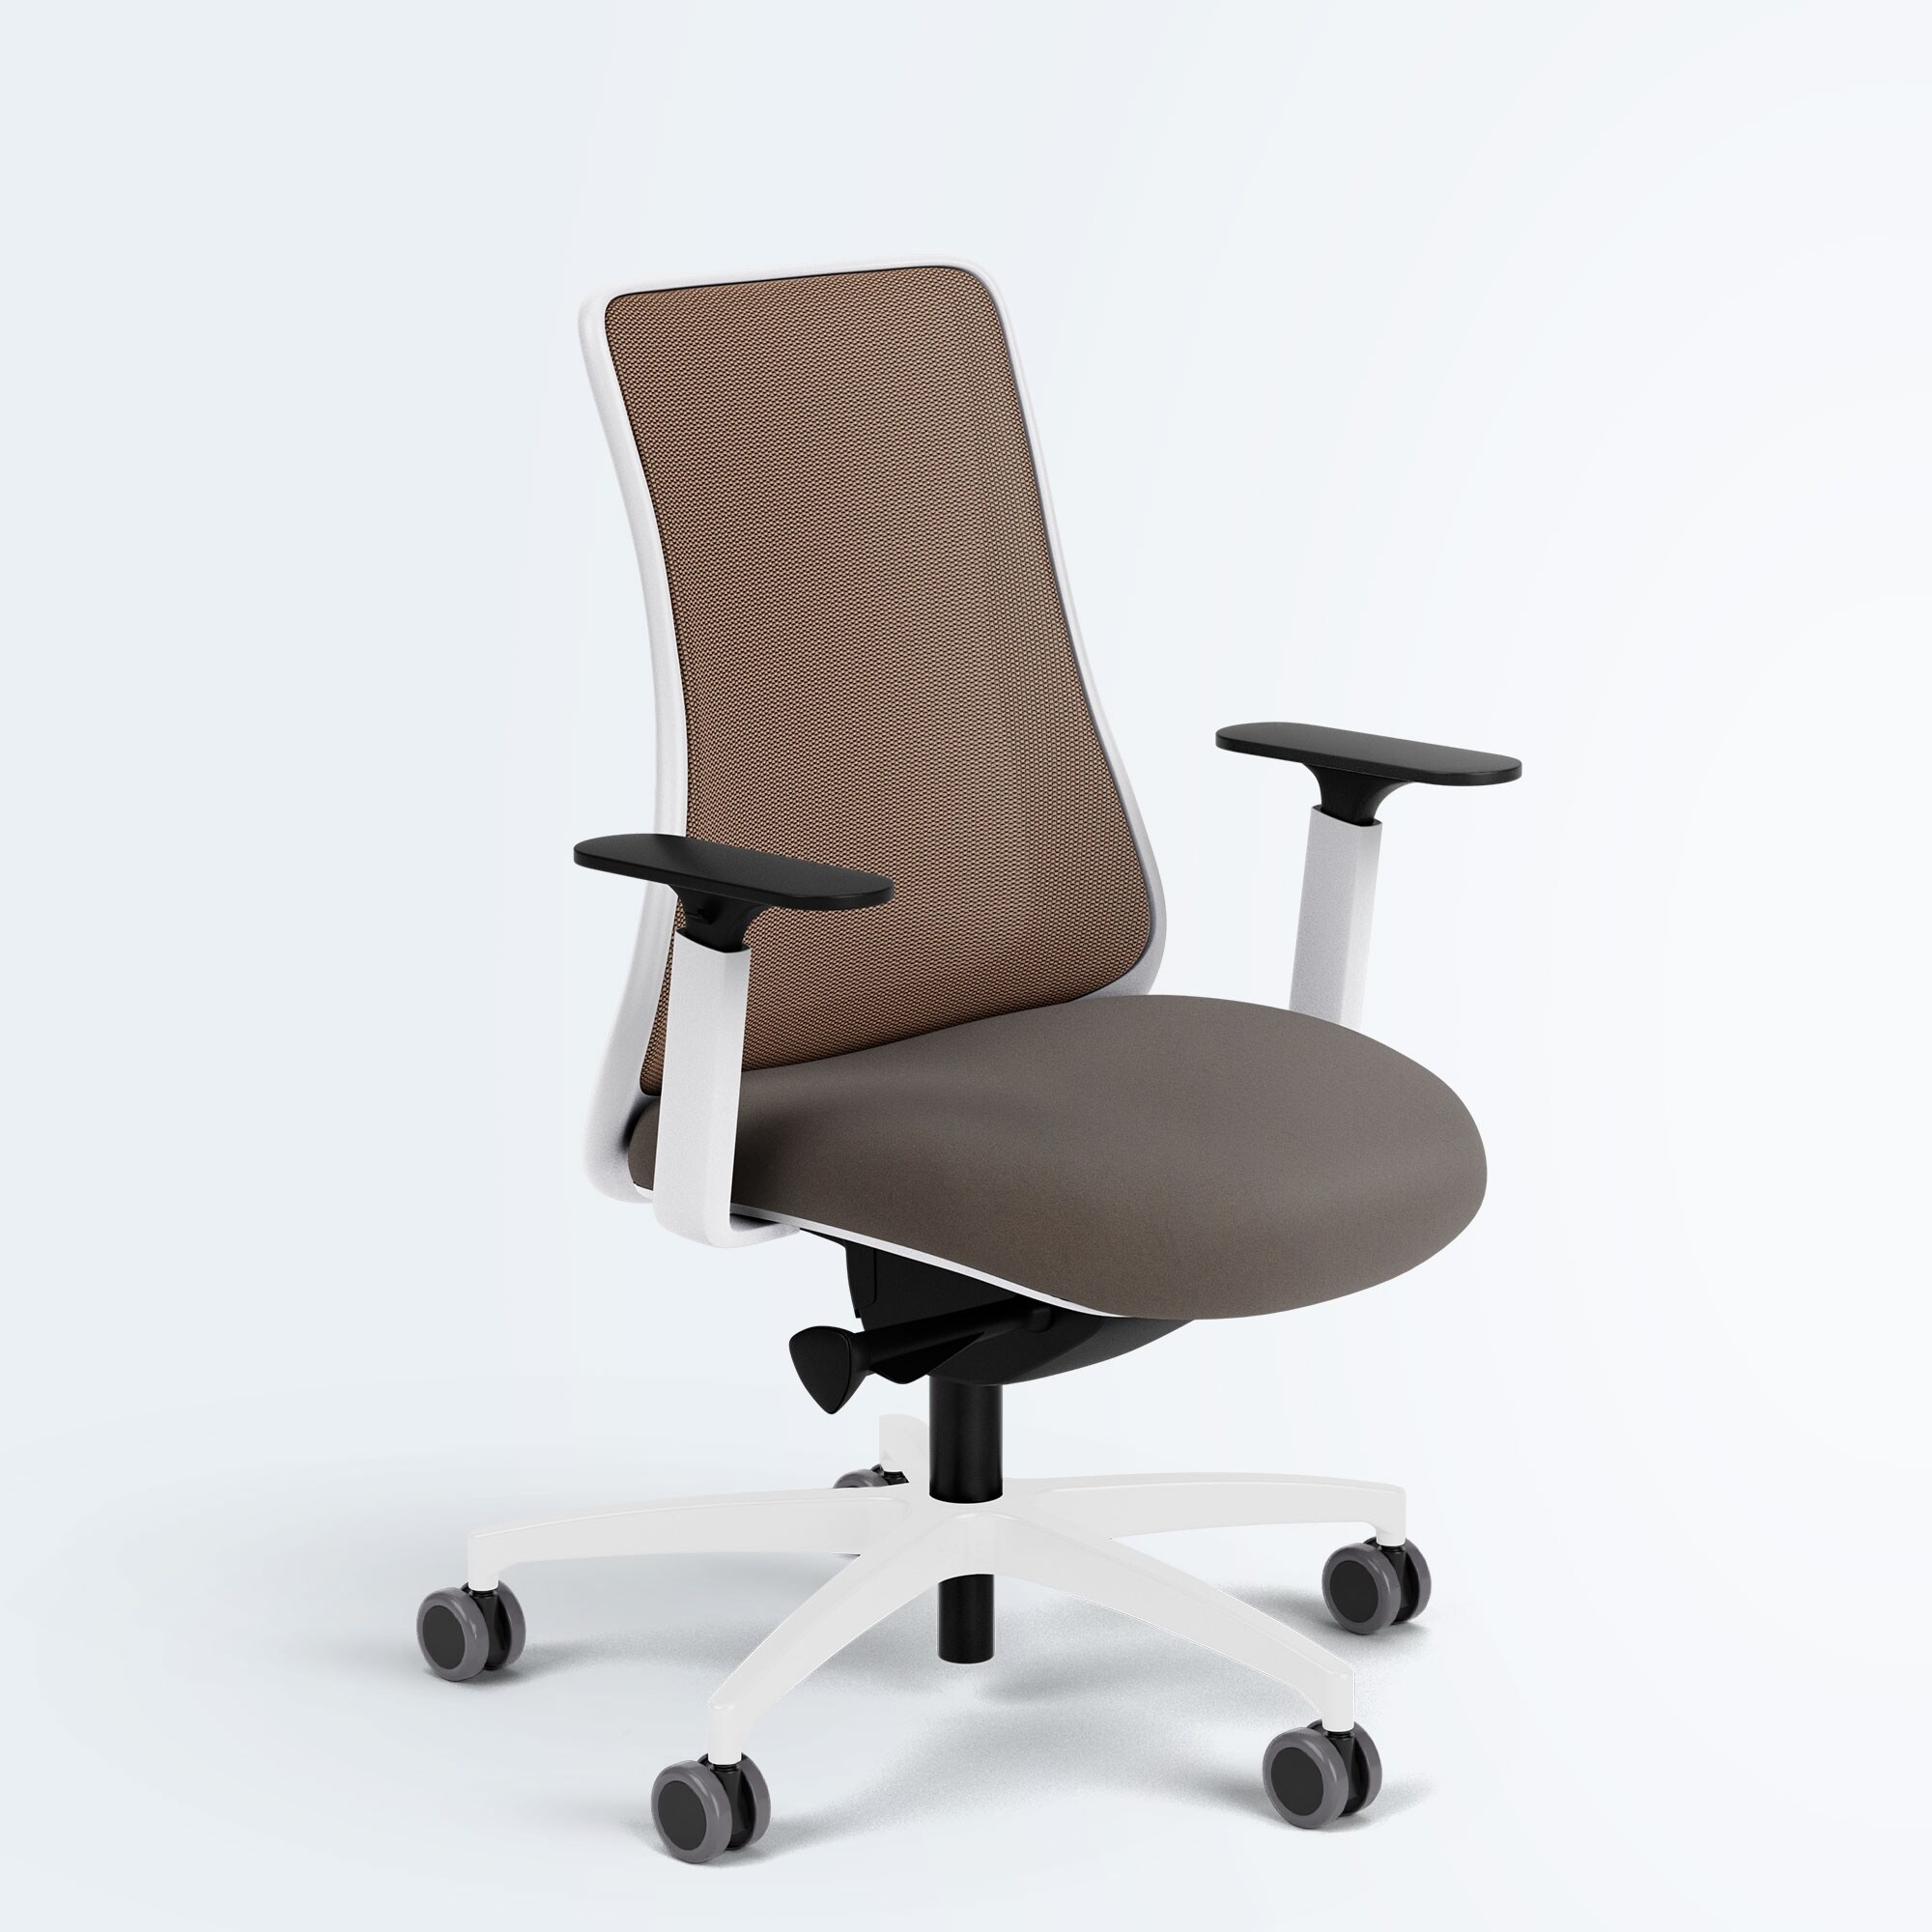 Via Seating Genie Ergonomic Chair with Copper-Infused Antifungal Mesh, White Frame